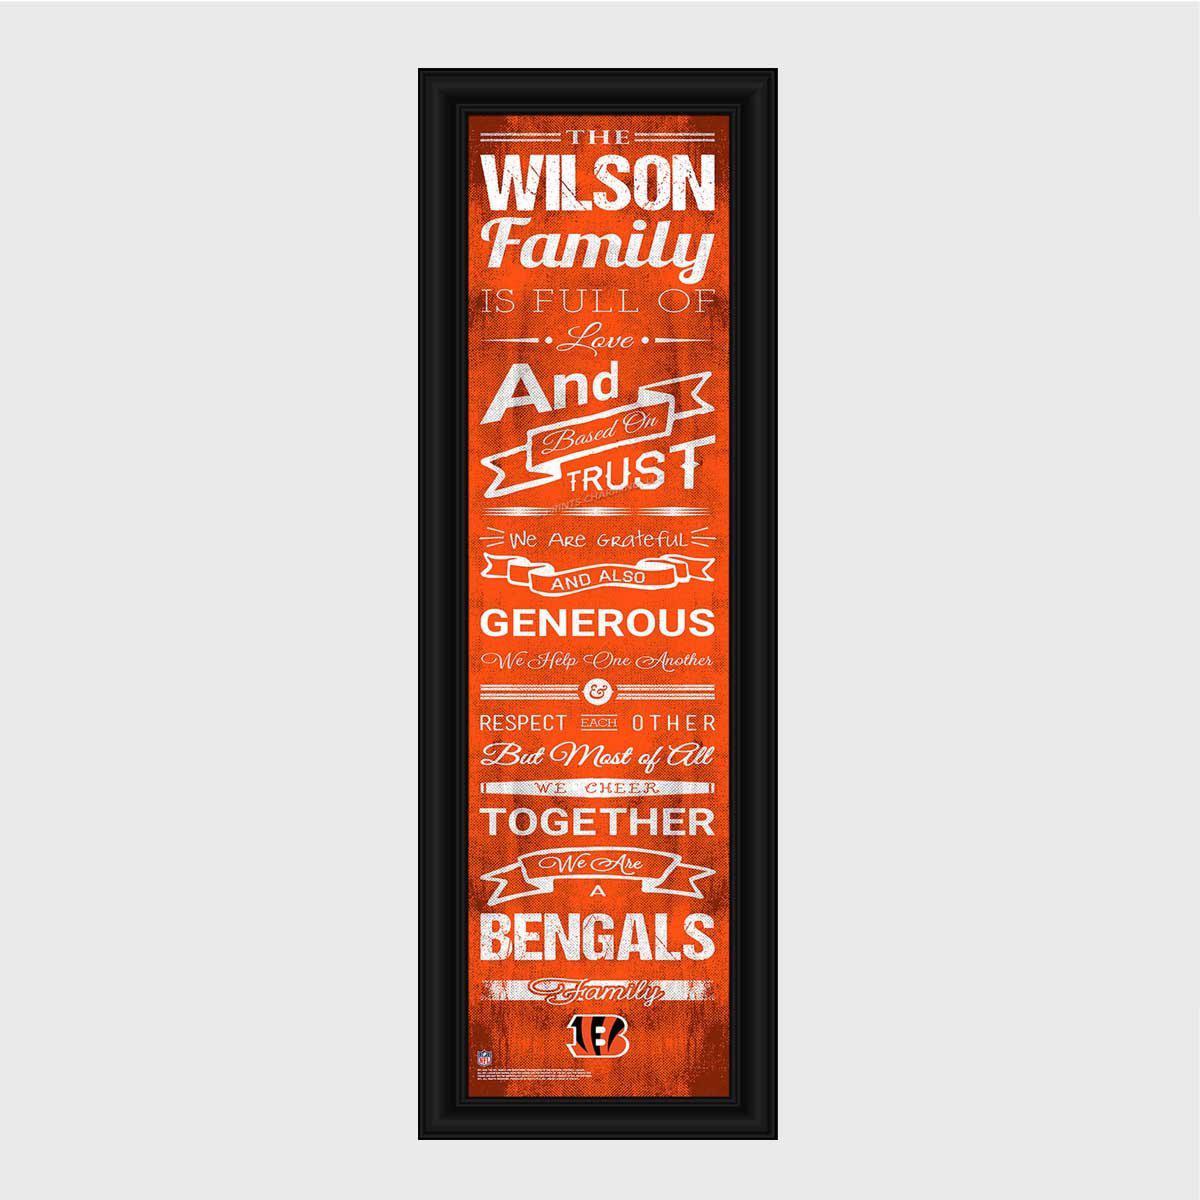 Personalized NFL Family Cheer Print & Frame - All NFL Team Available